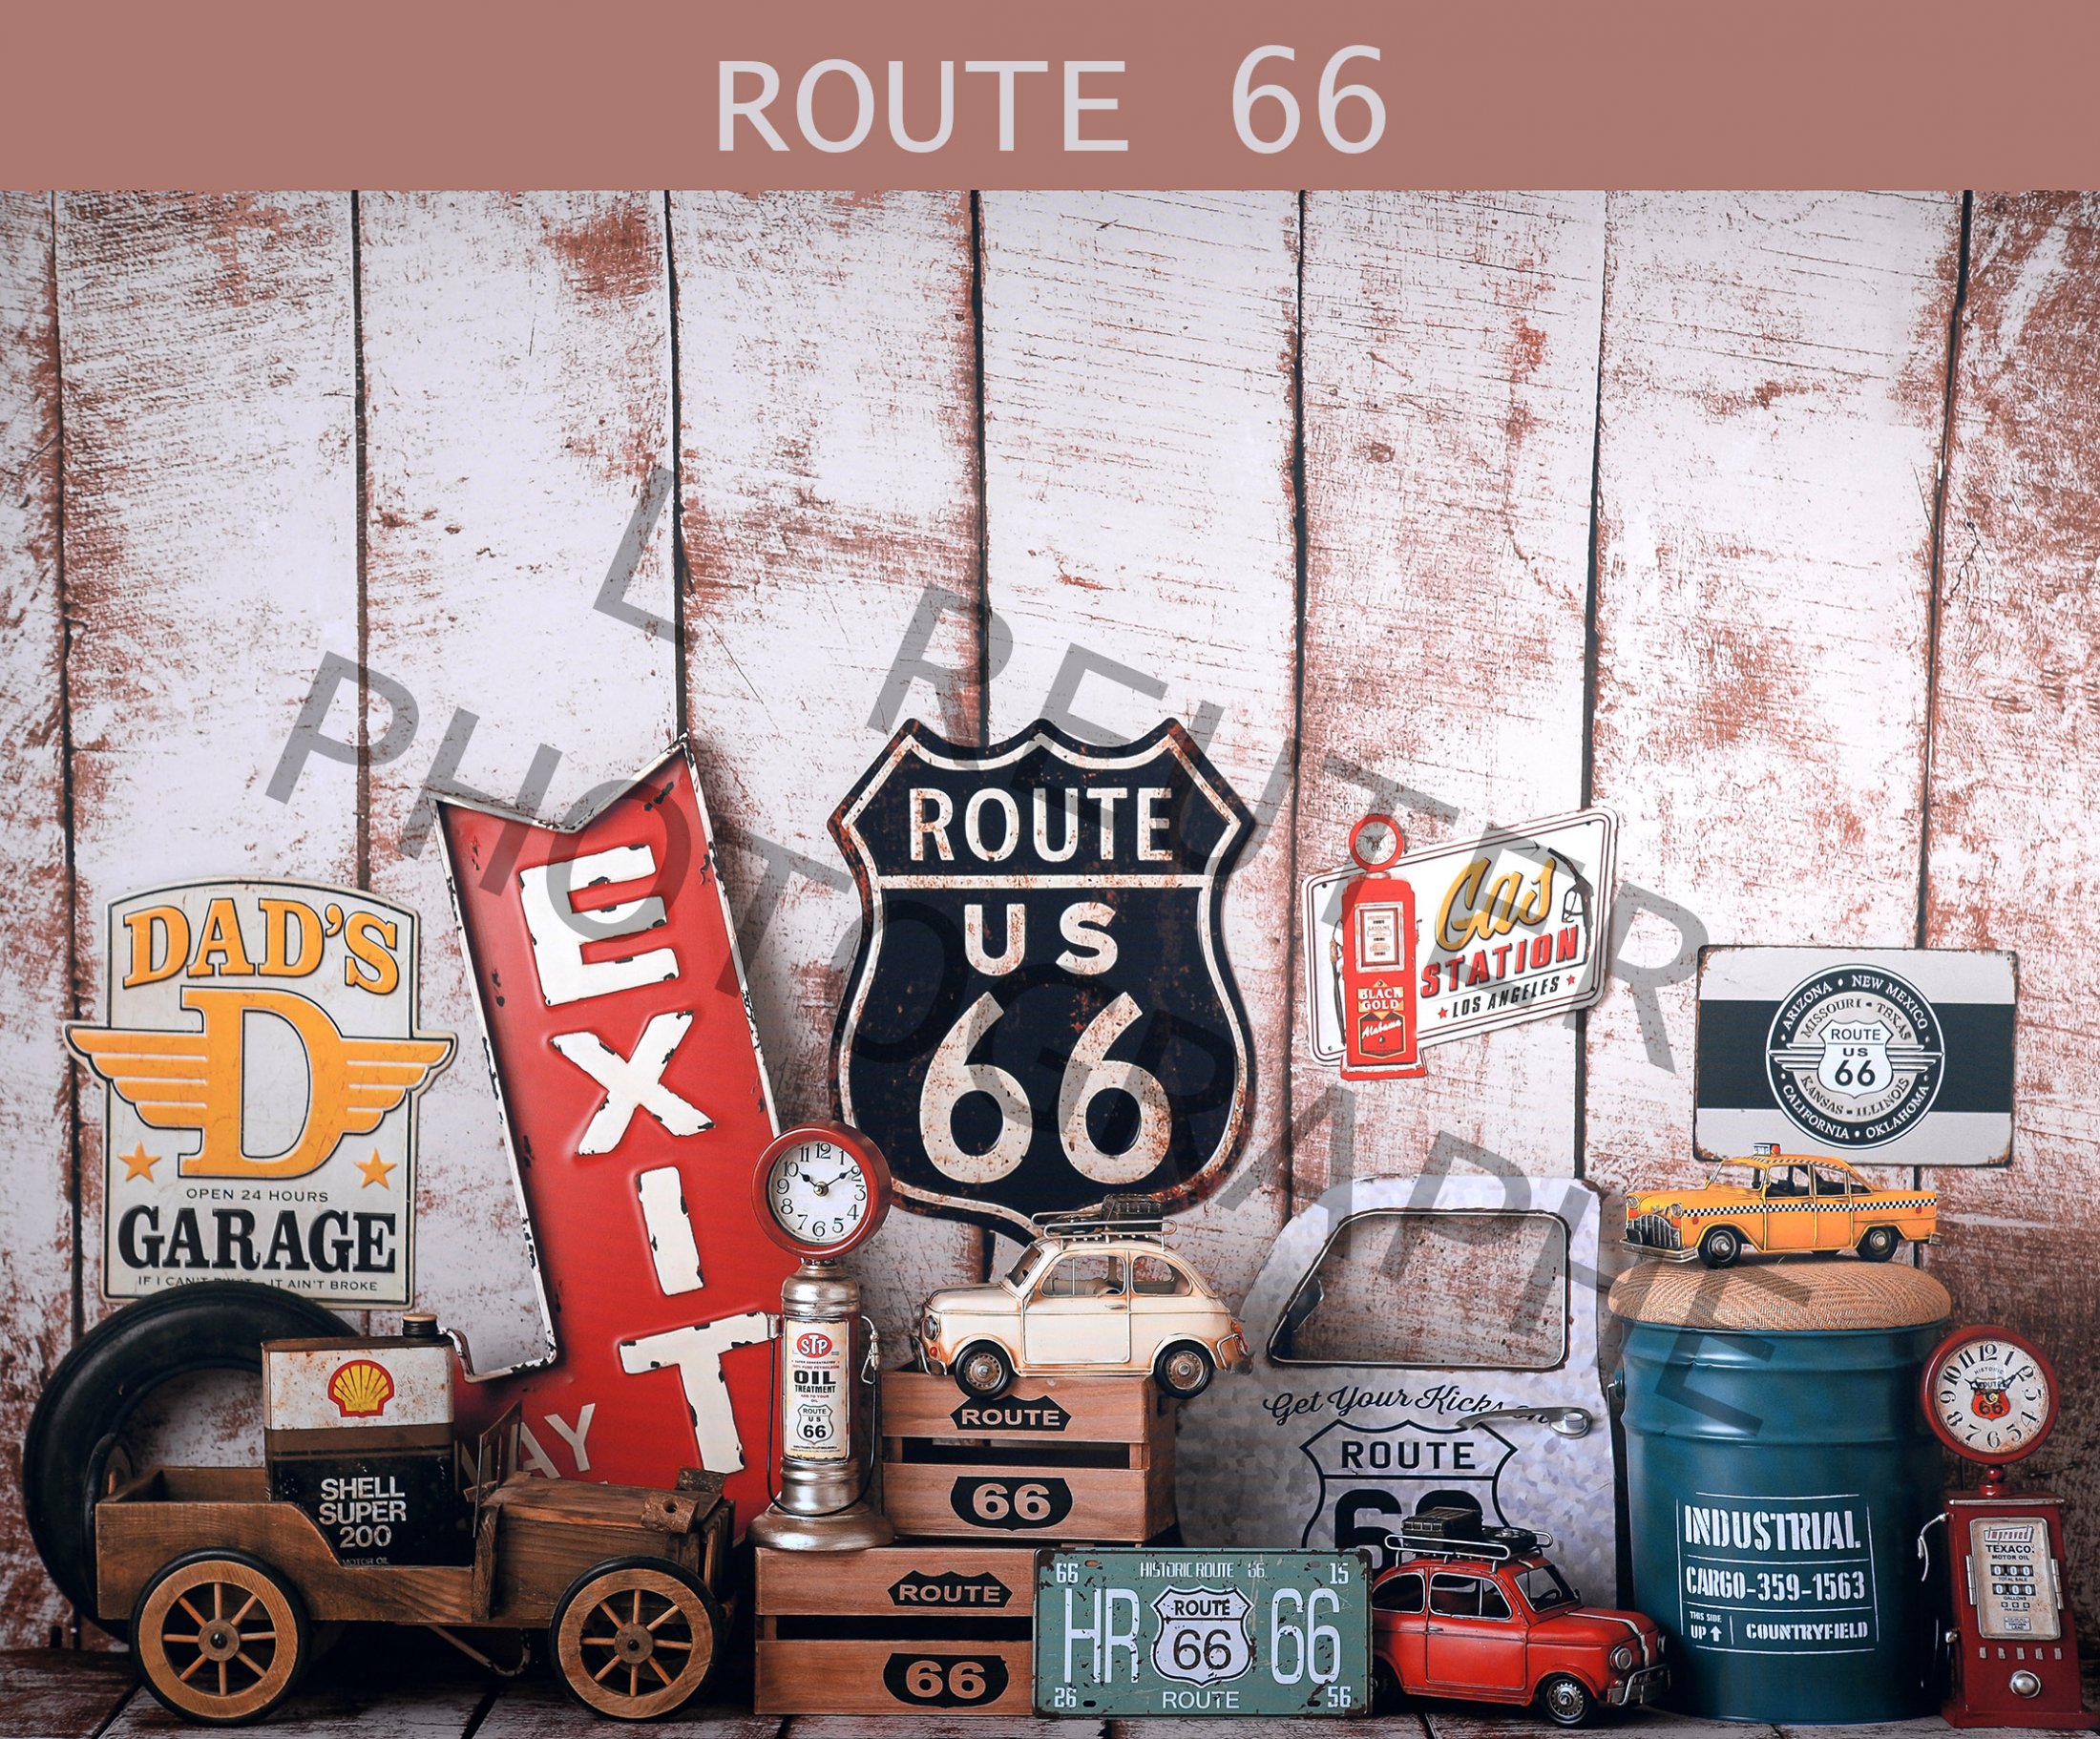 33 Route 66 Final